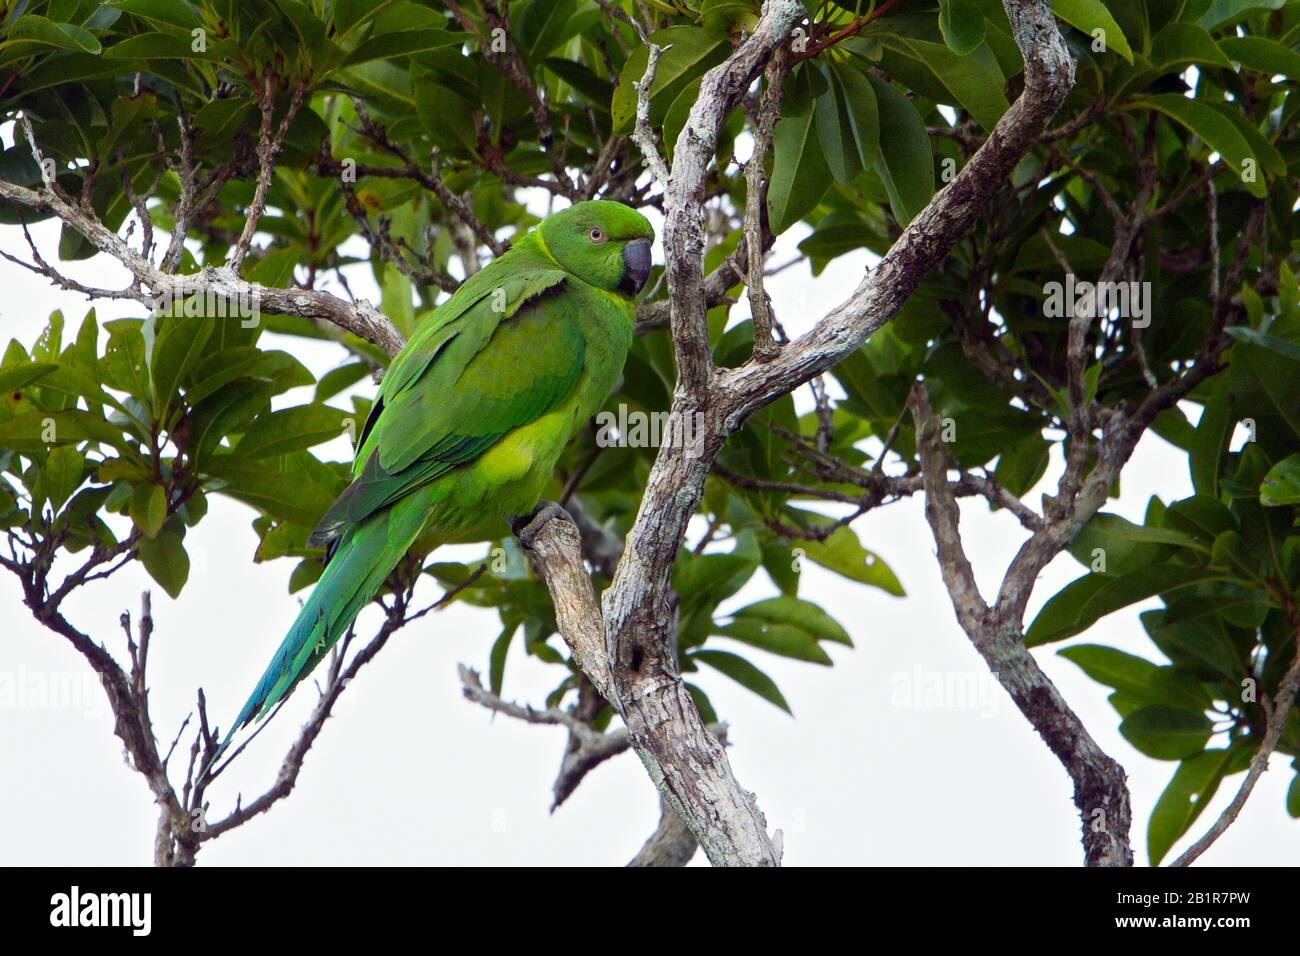 mauritius parakeet (Psittacula echo), a species of bird on the verge of extinction, Mauritius Stock Photo